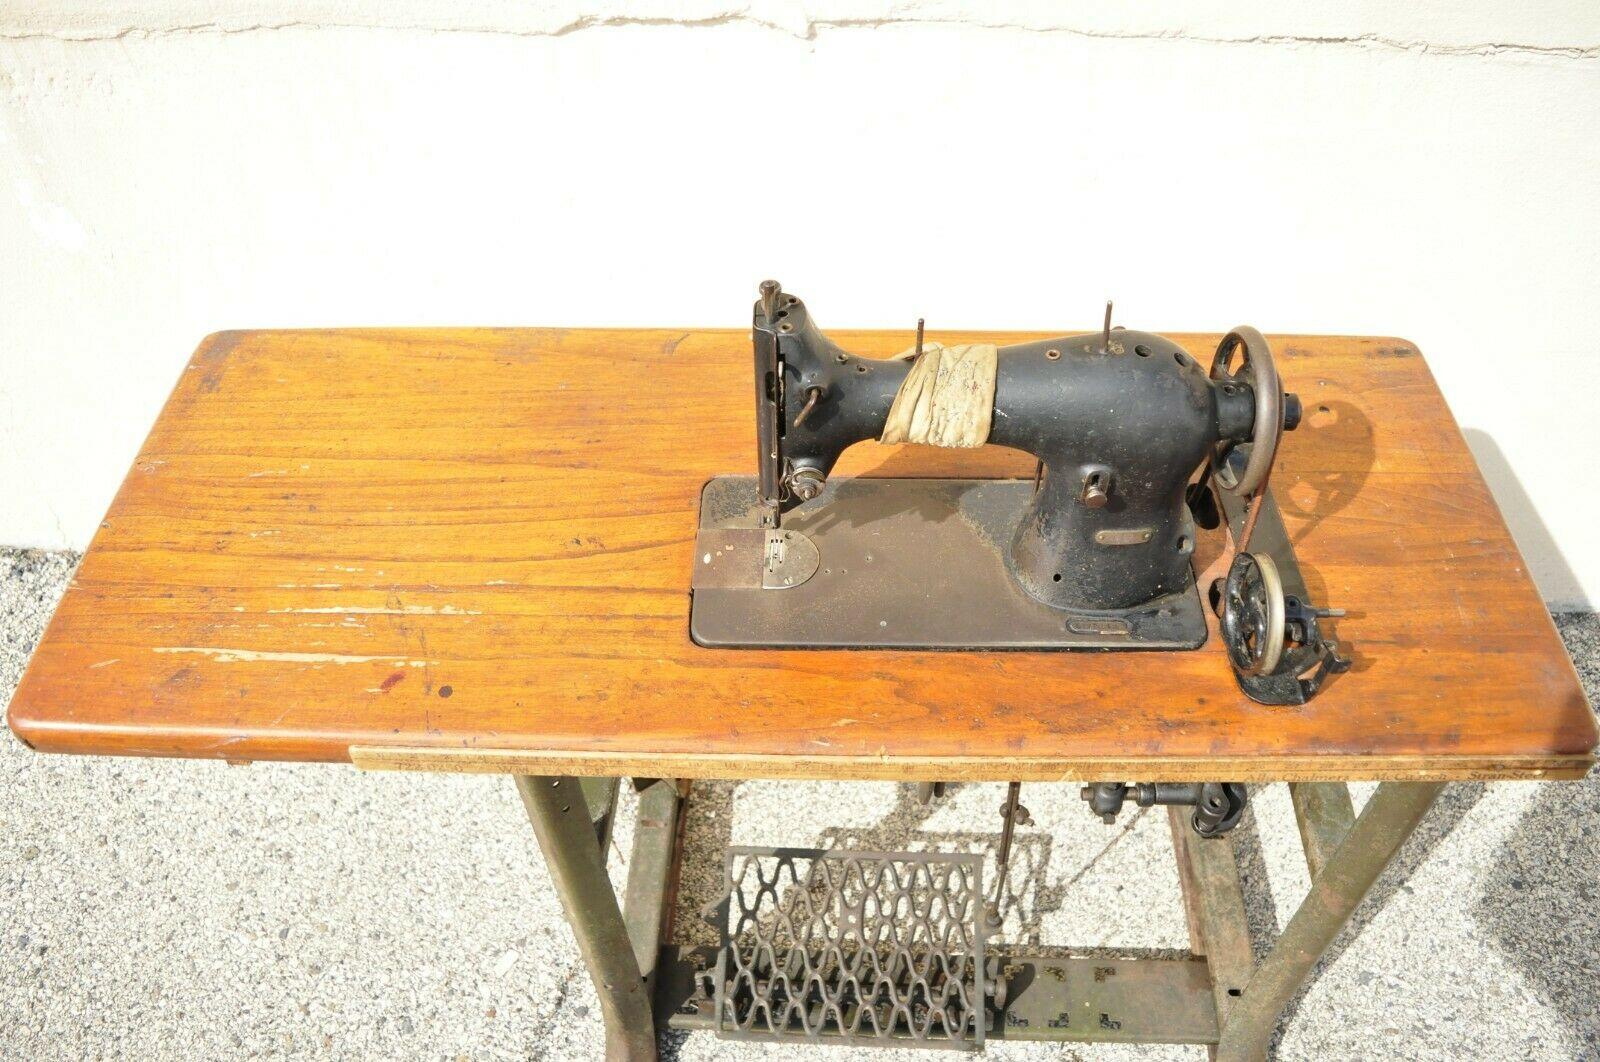 Antique Kingston Conley electric motor industrial vintage sewing machine. Item features a wooden top work table surface, green metal base, electric motor, very nice vintage item, great style and form. Circa Mid 20th Century. Measurements: 41